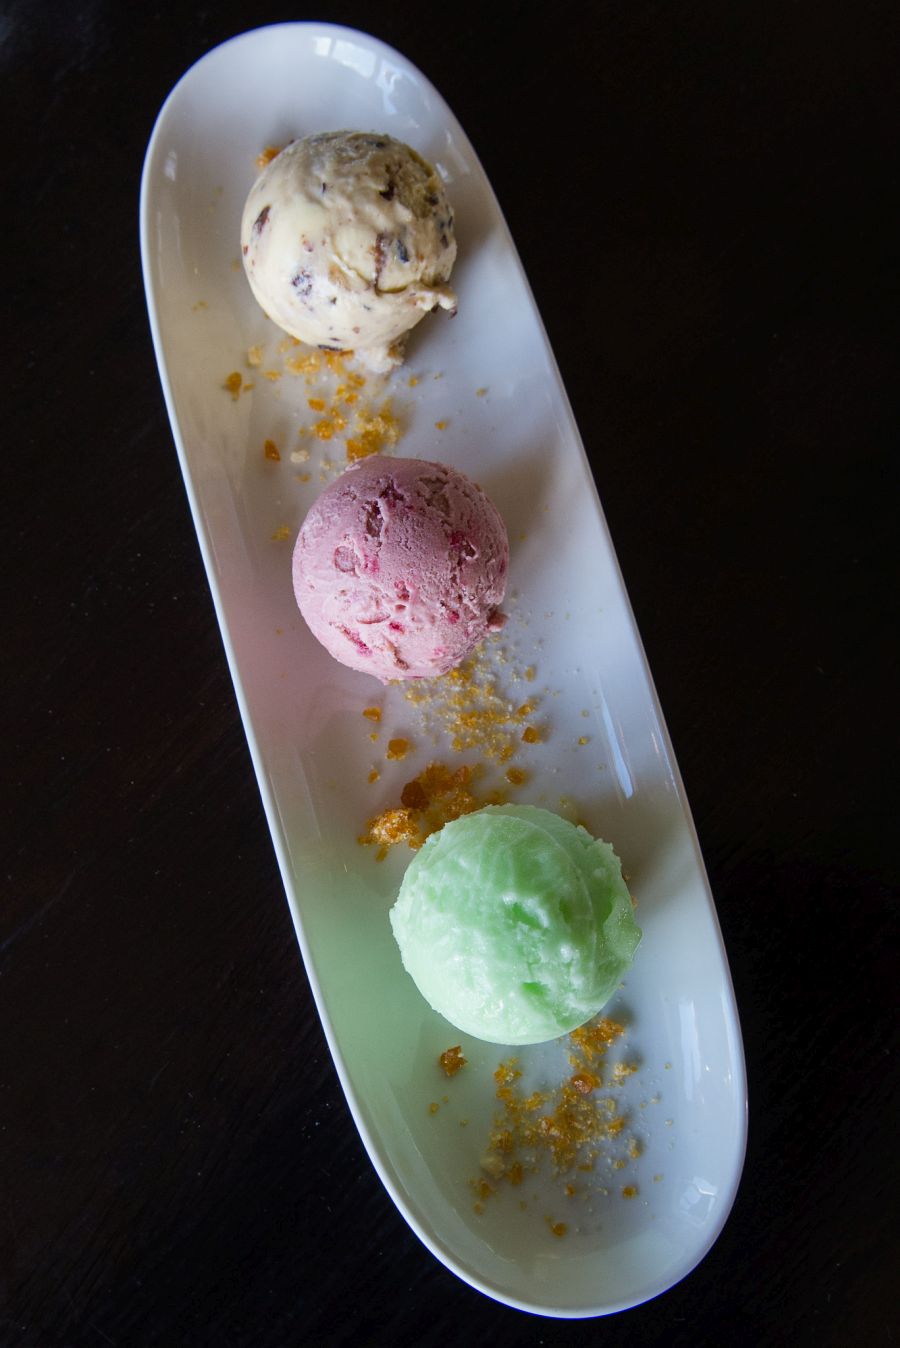 Top to bottom: Fruit mince ice cream, berry ice cream and apple sorbet (NZ$12 for three scoops, selection changes daily)